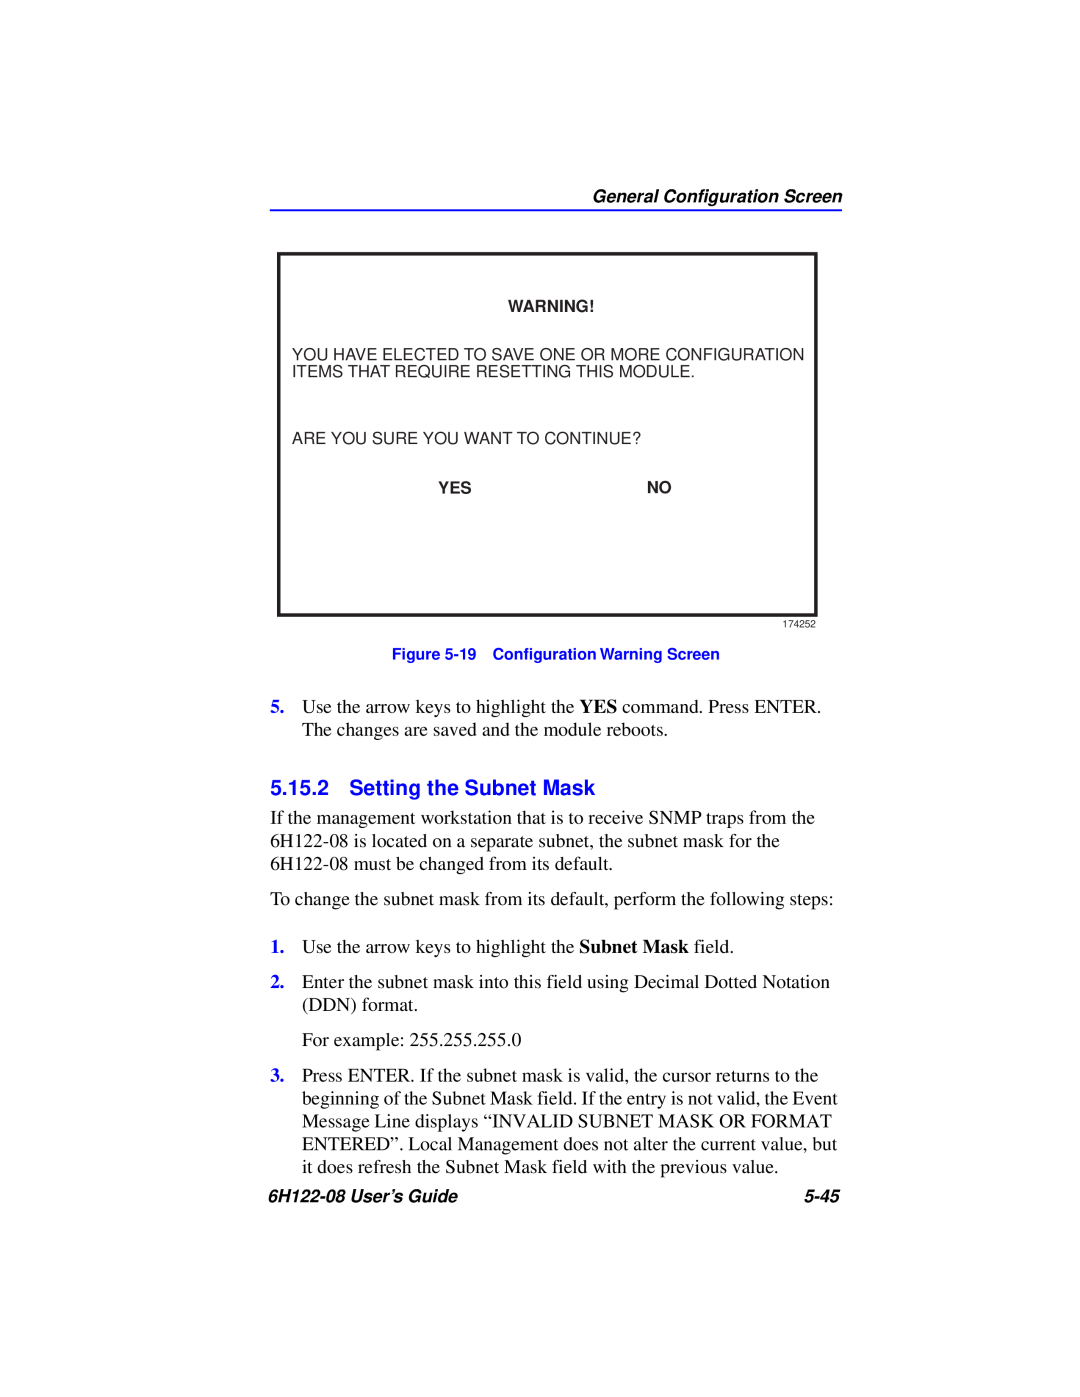 Cabletron Systems 6H122-08 manual Setting the Subnet Mask 